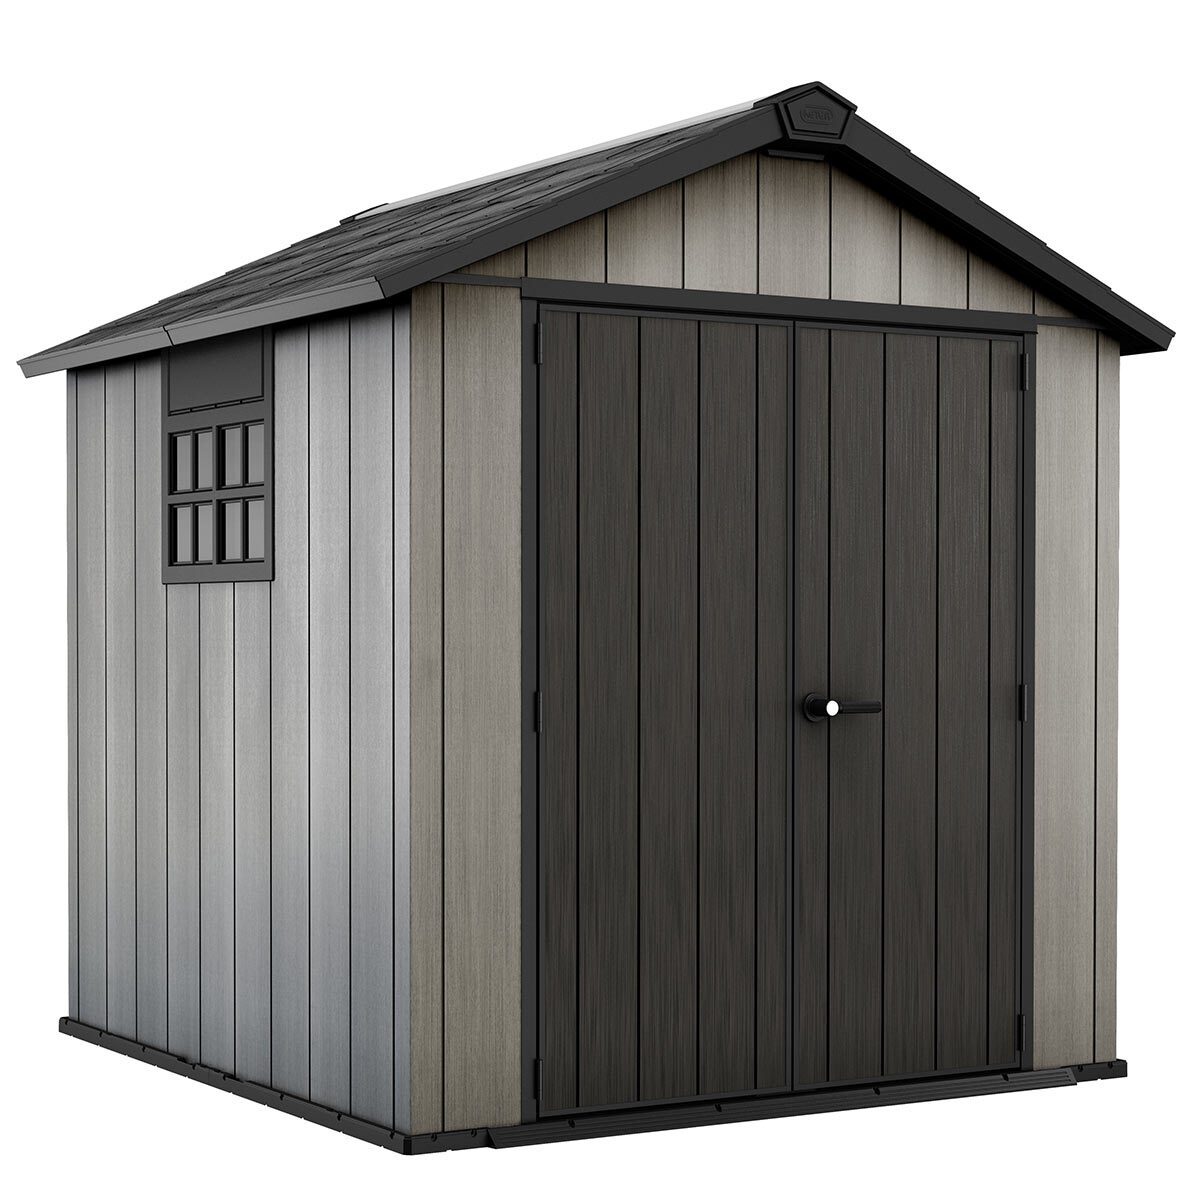 Keter Oakland 7ft 6" x 7ft (2.3 x 2.1m) Shed